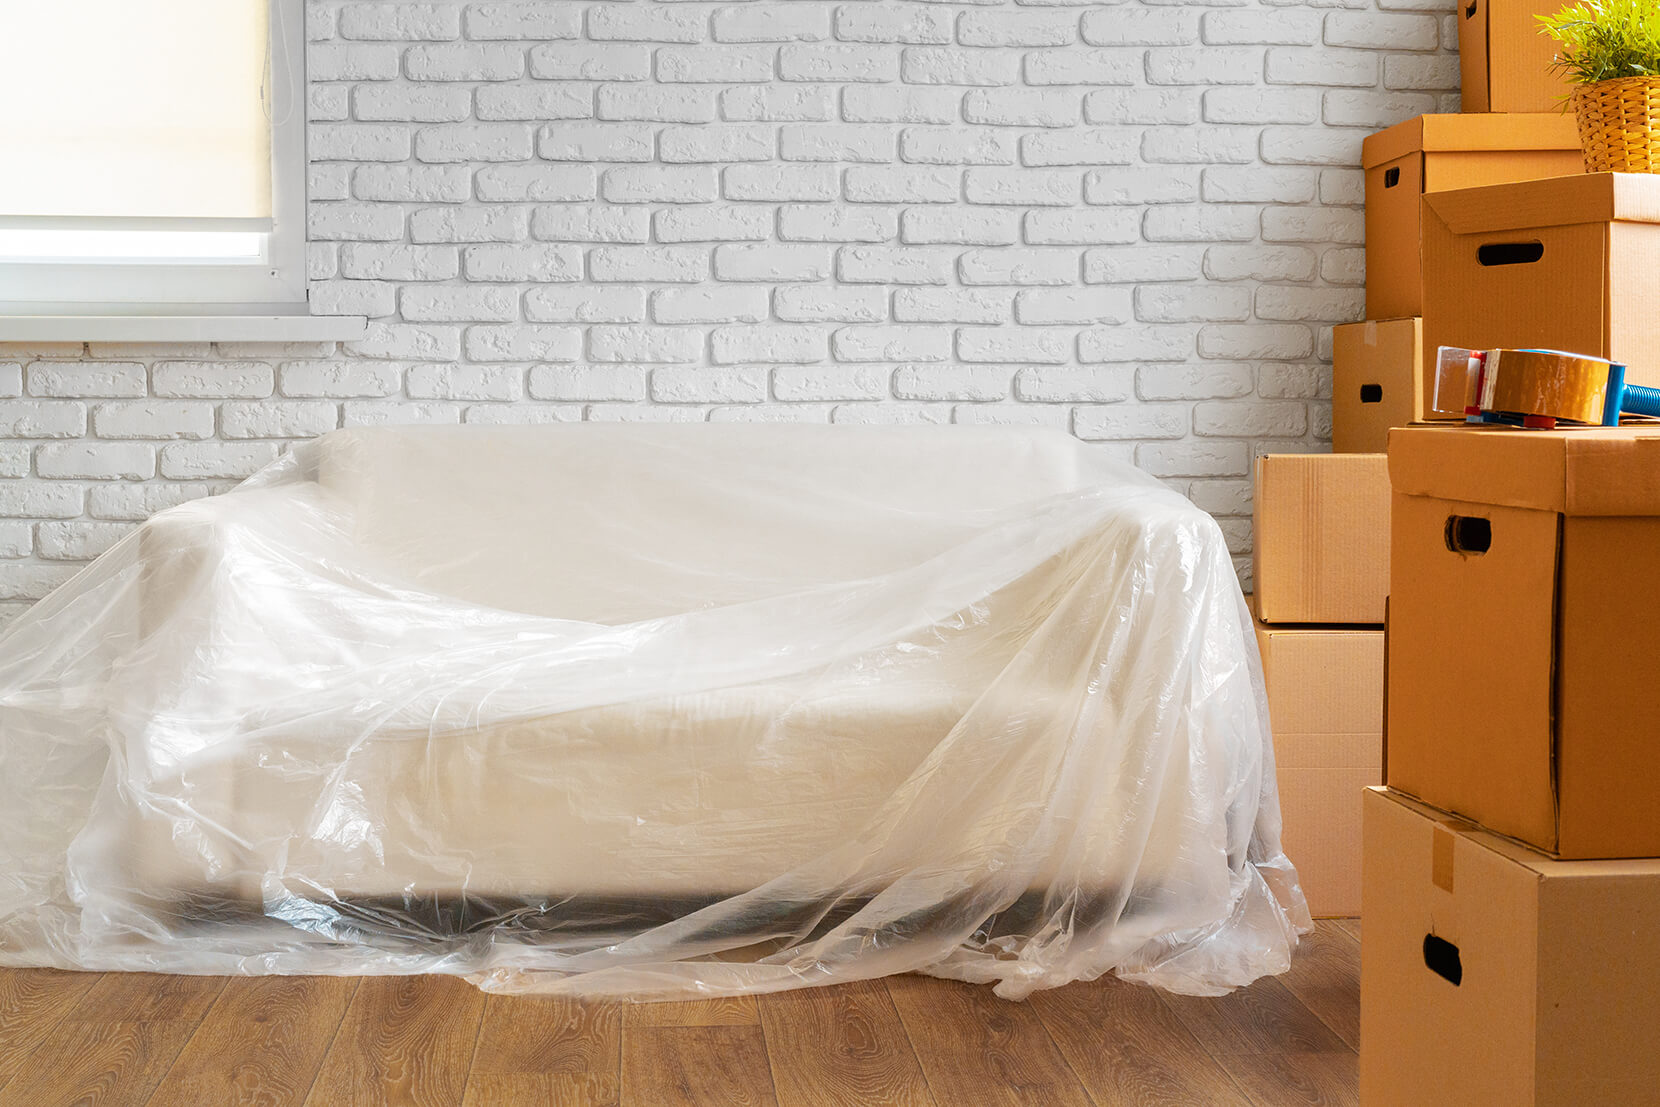 How To Pack Sofa For Moving